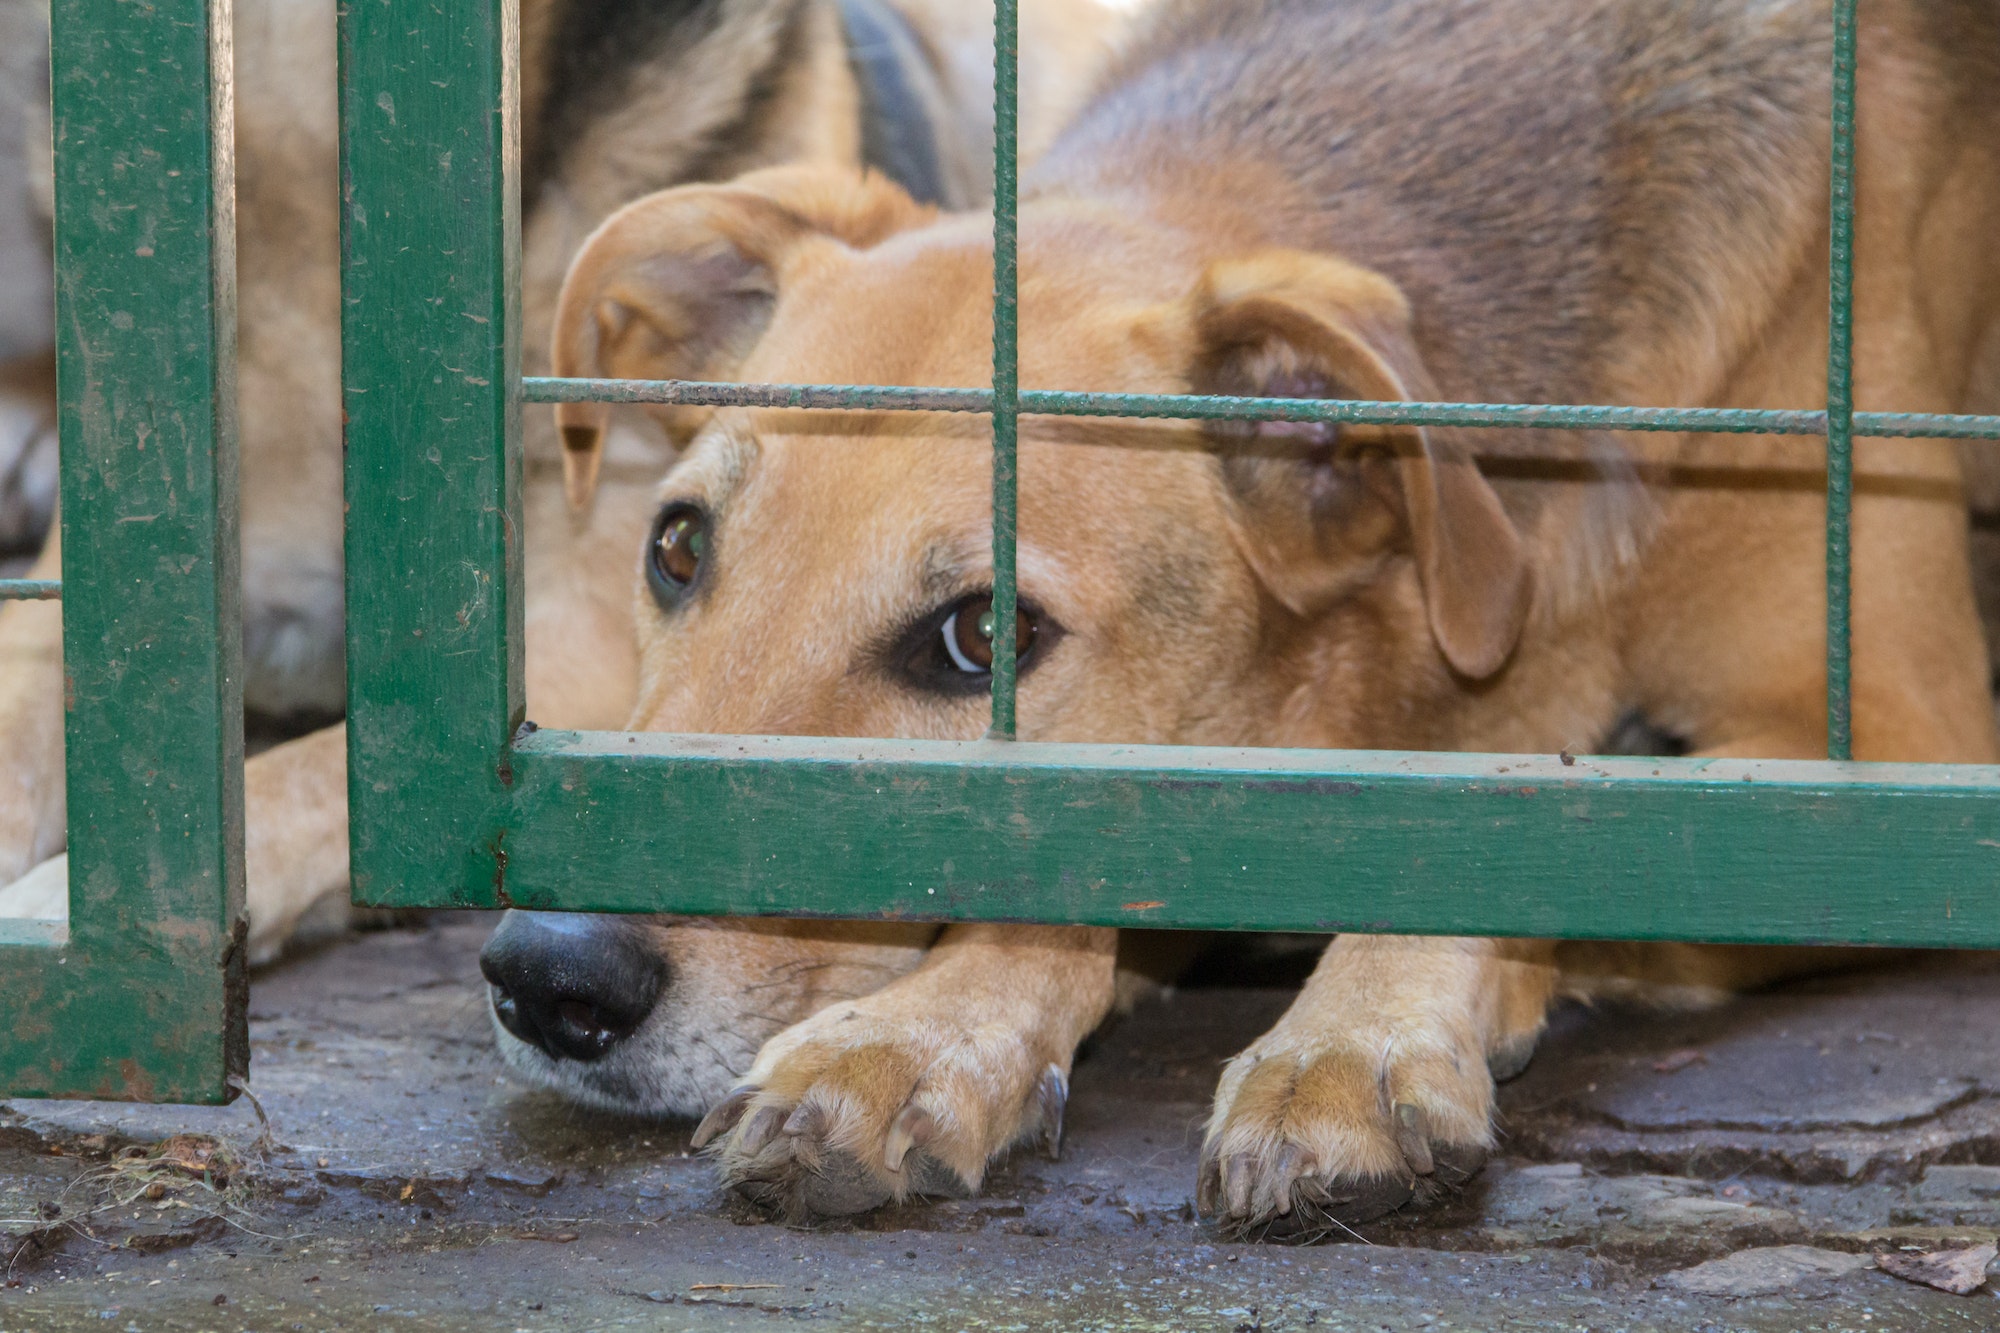 How To Report Animal Cruelty in Your Community